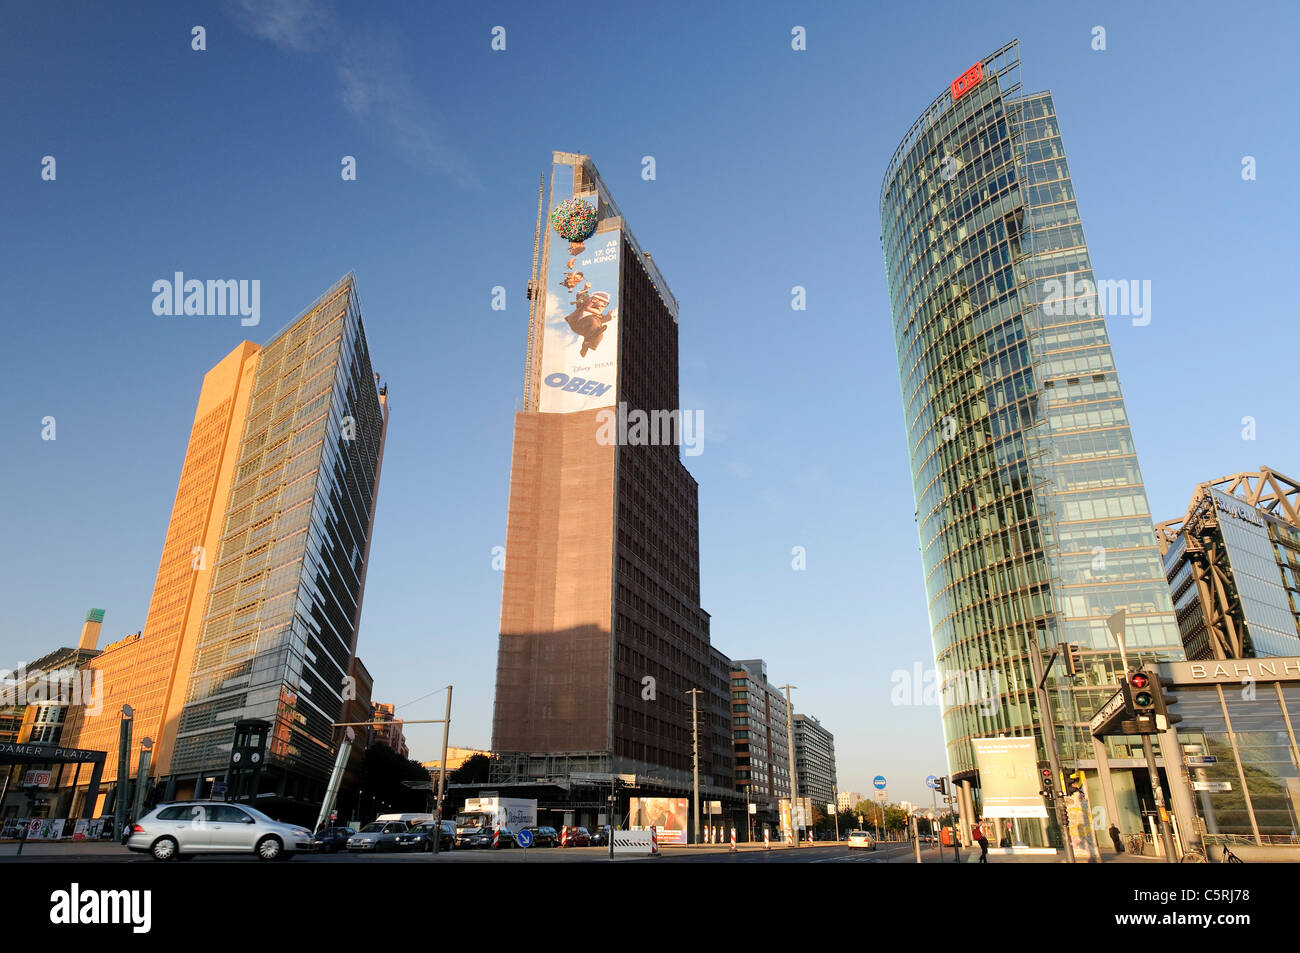 High-rise buildings on Potsdamer Platz square, in the morning, Berlin, Germany, Europe Stock Photo